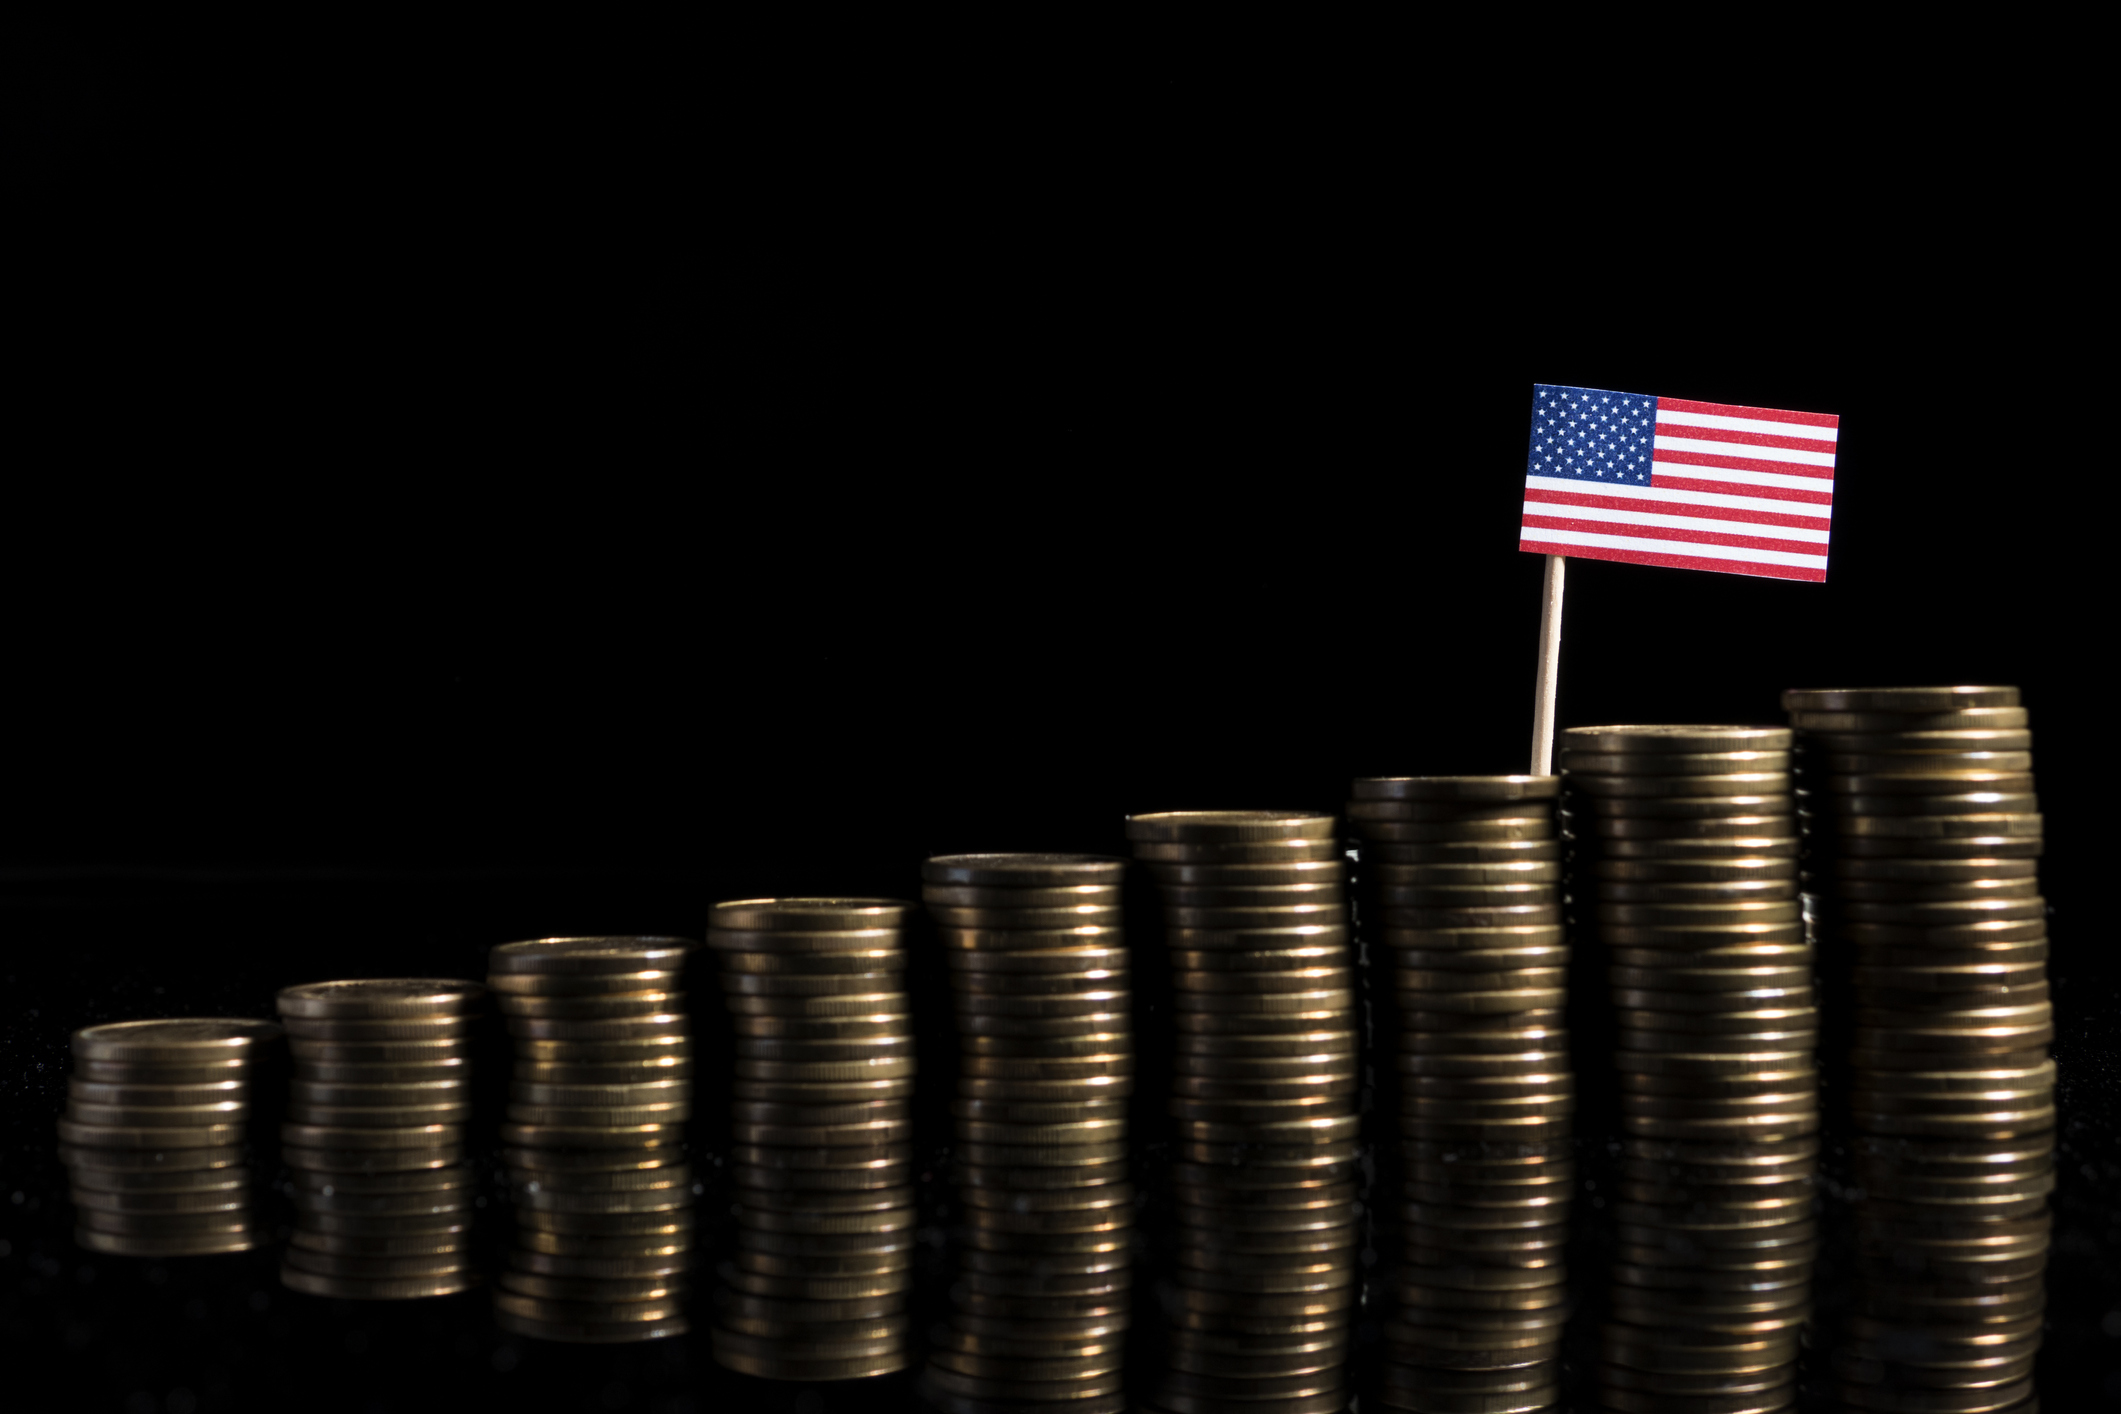 Stacks of coins and a U.S. flag.